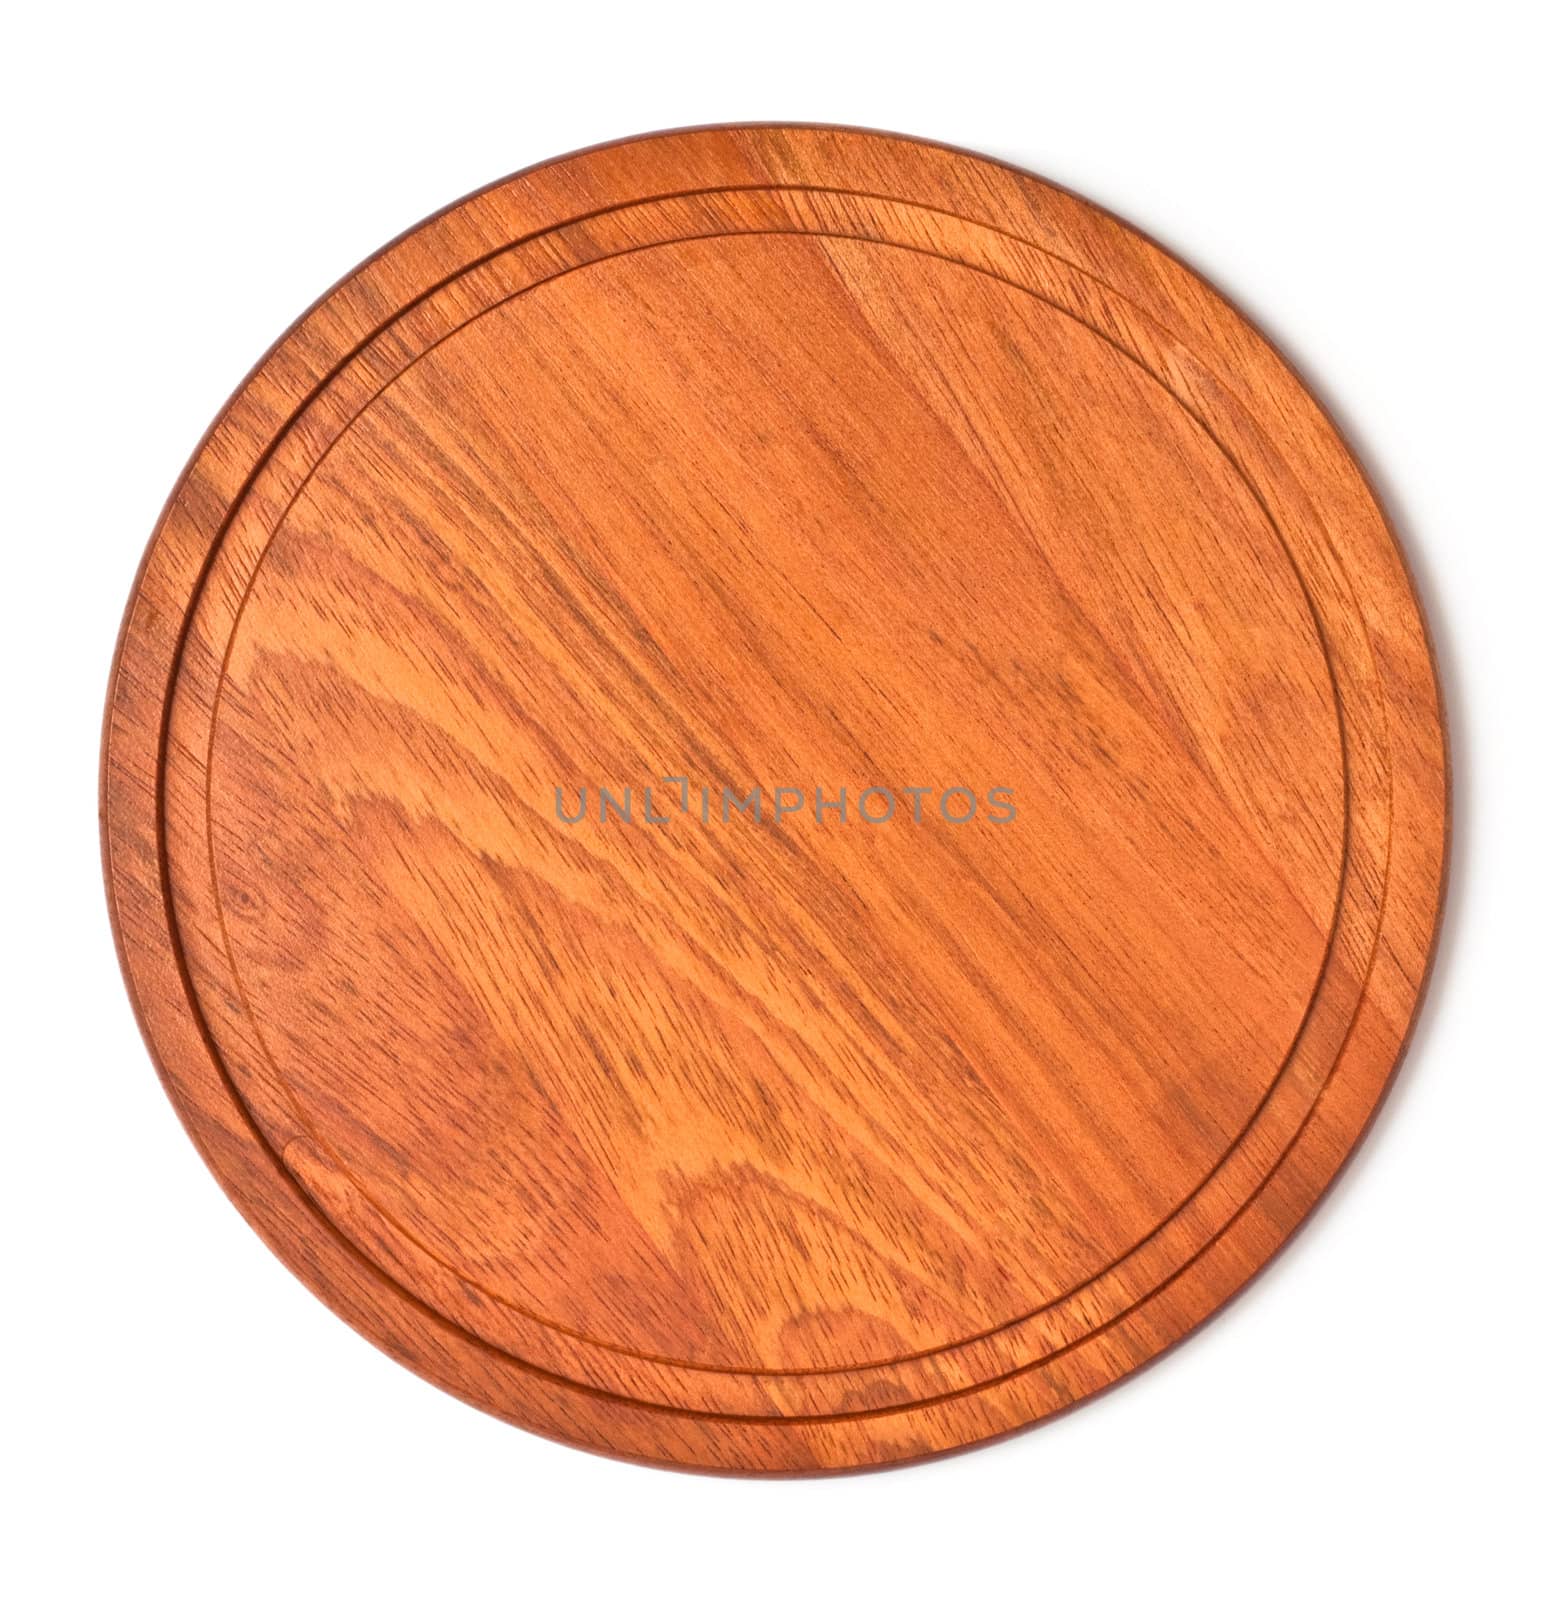 wooden tray isolated on white background